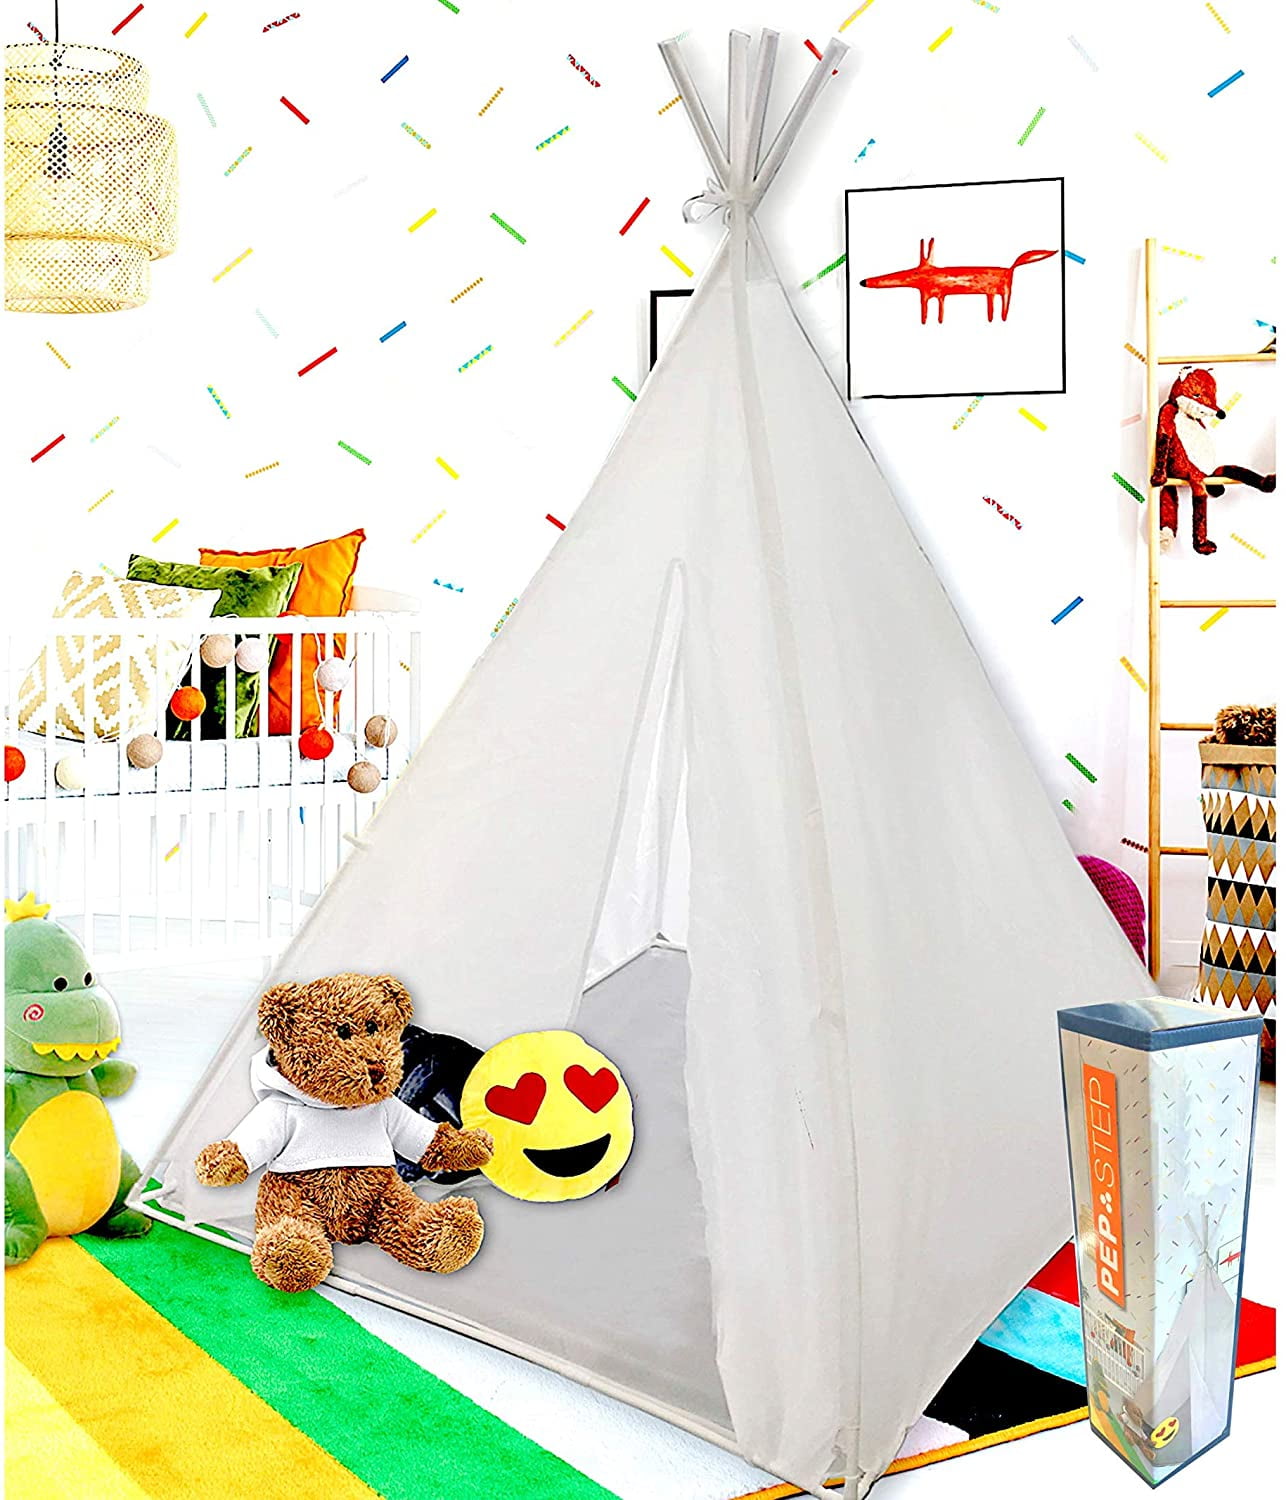 5' Portable Play Tent for Children 